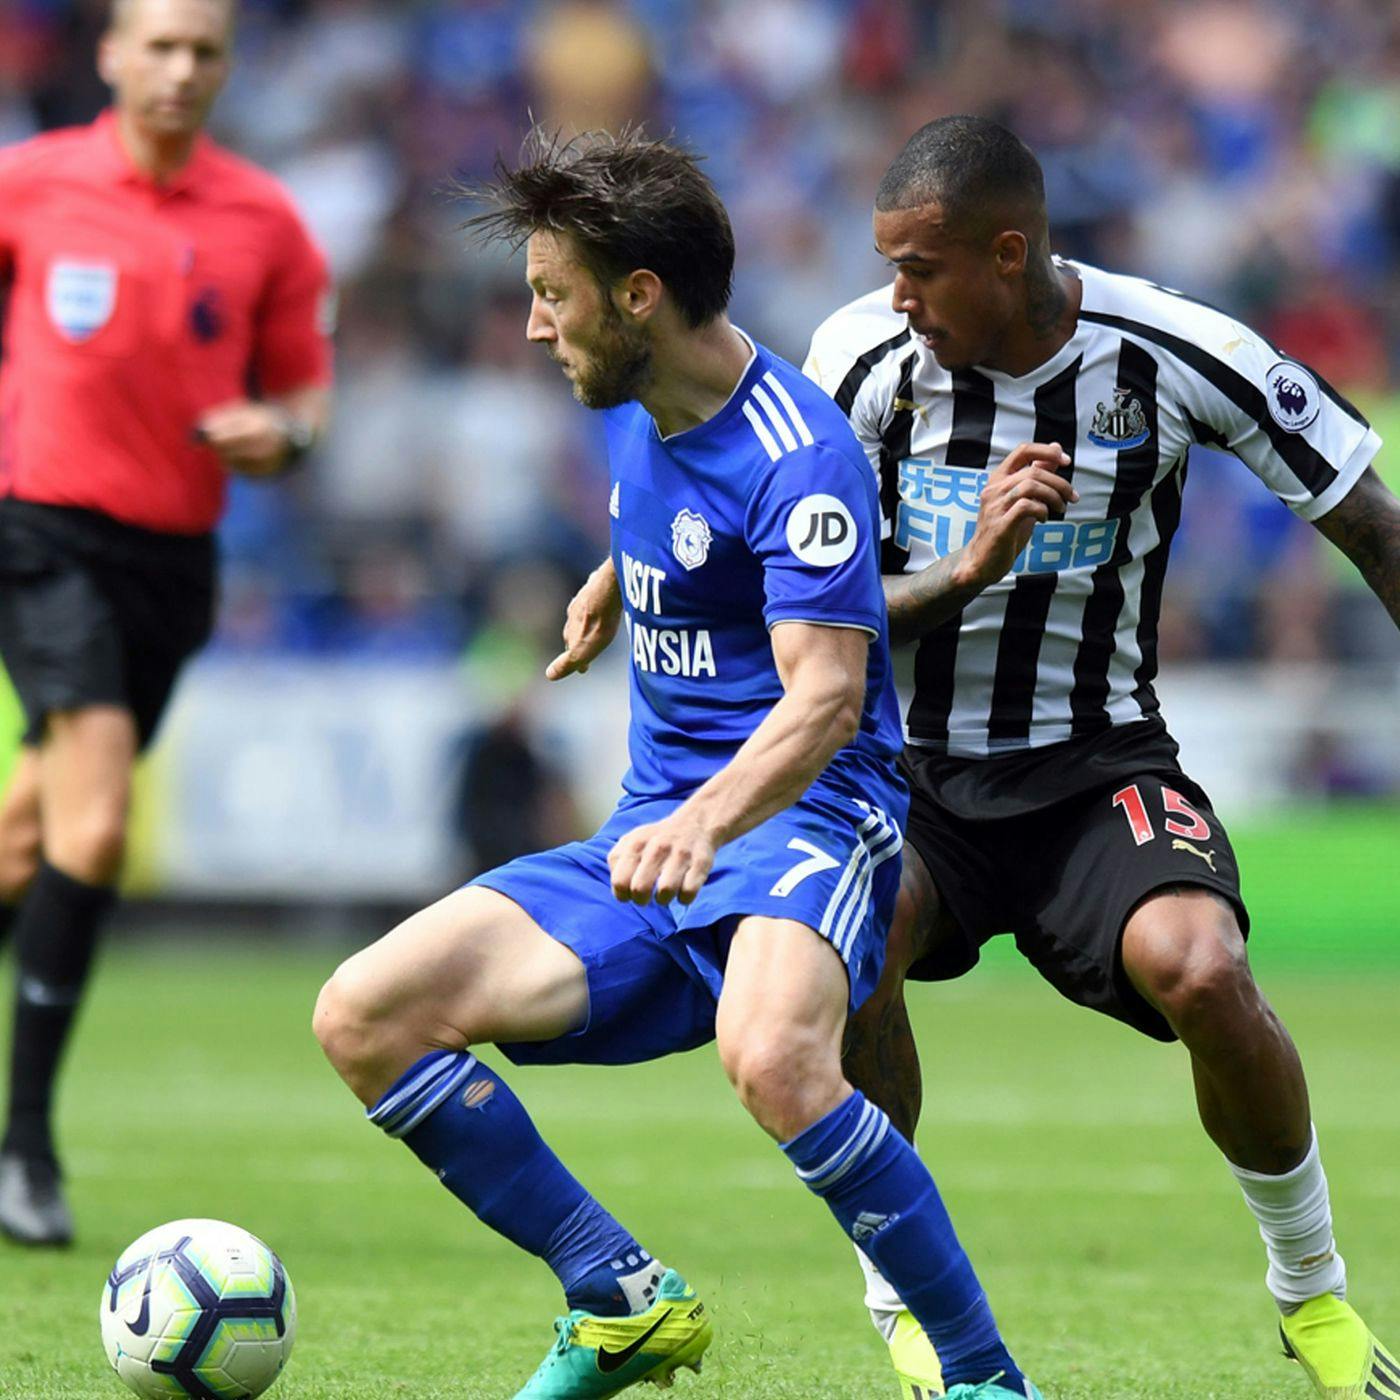 Two positions that are a worry for Cardiff, plus Newcastle positives